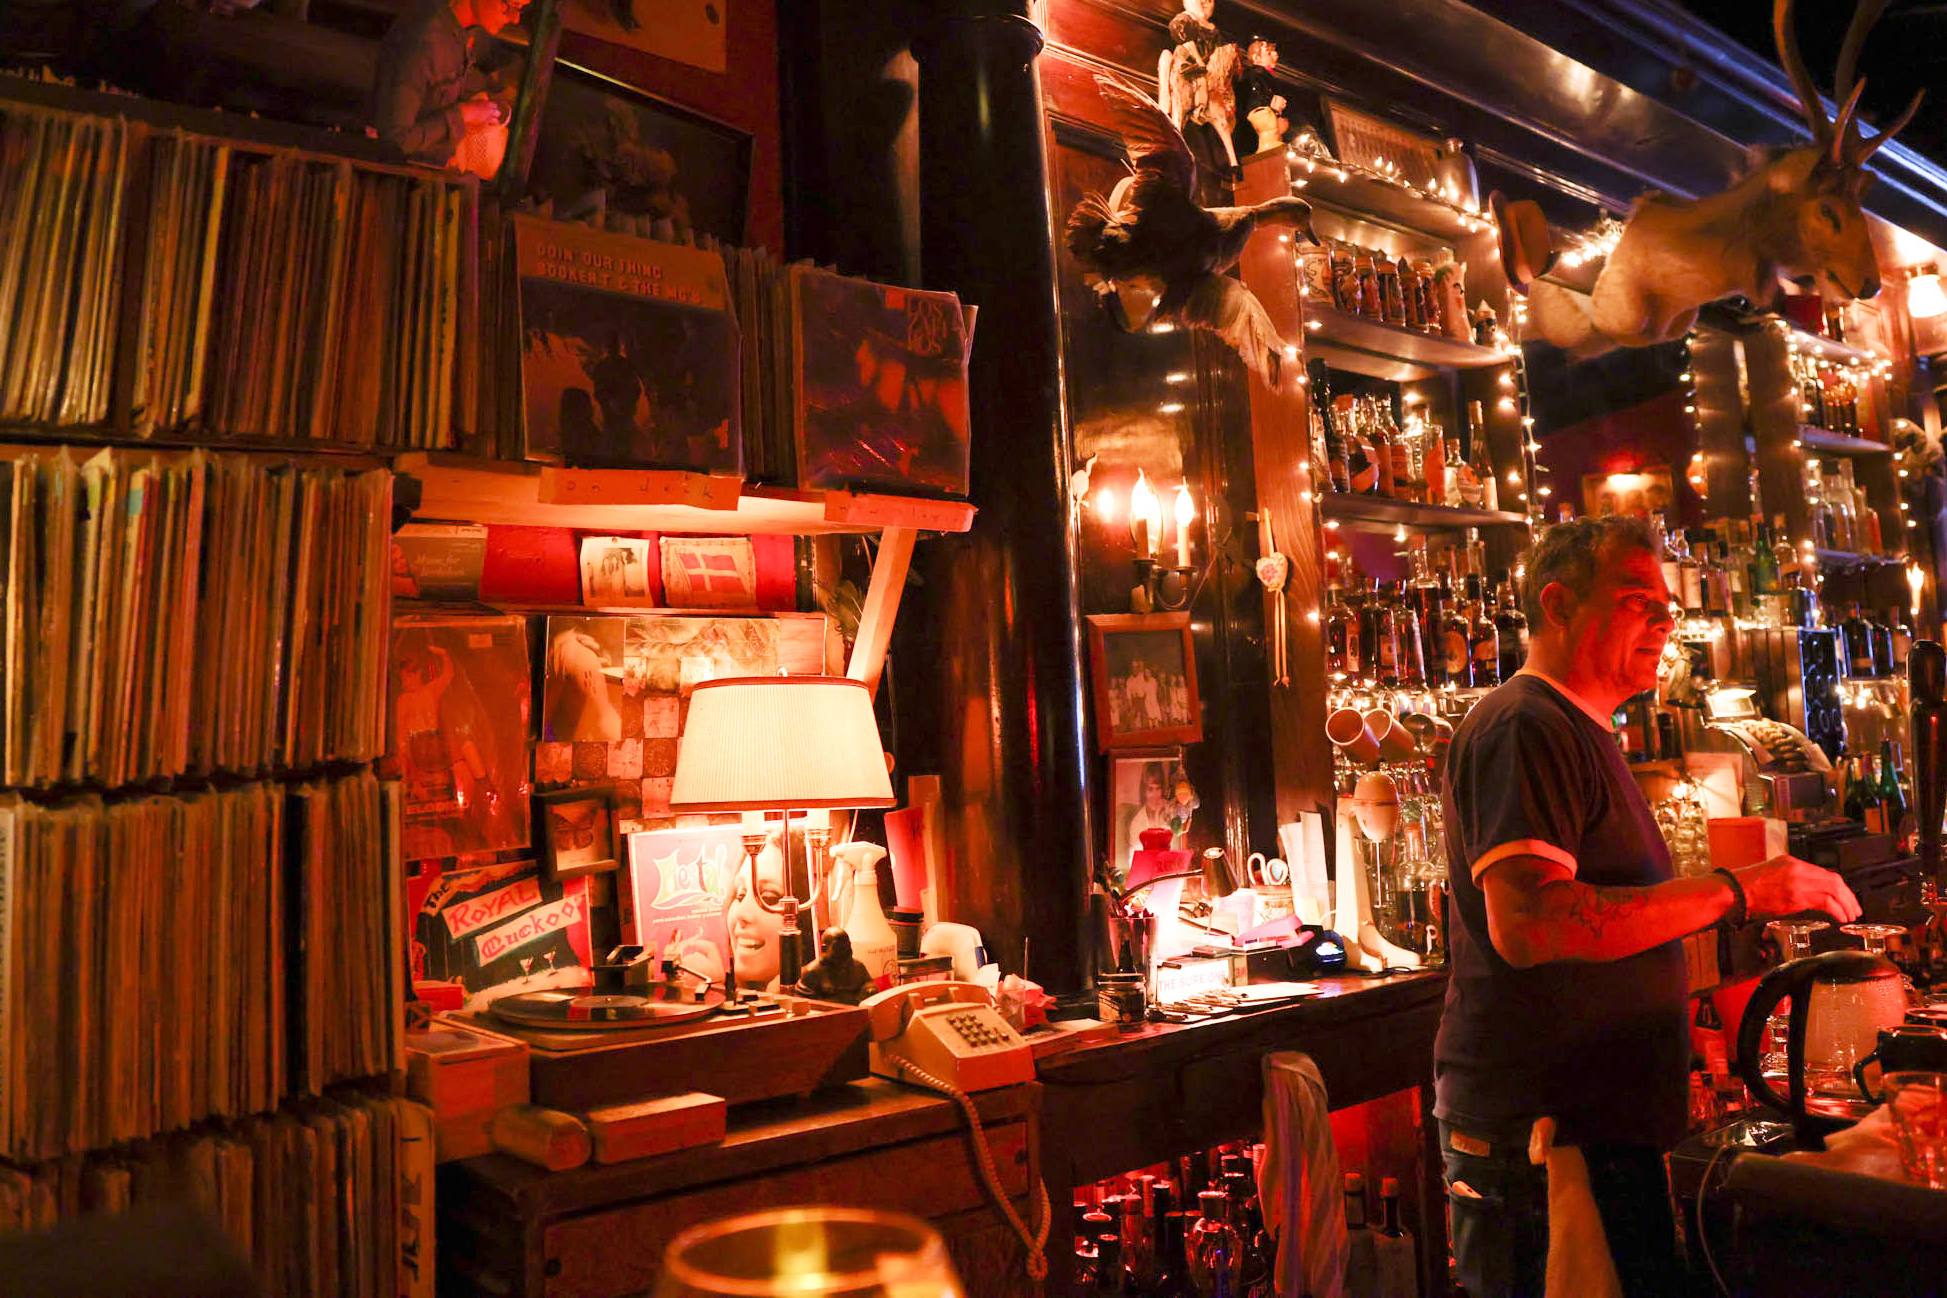 Flip the album and order another round at these SF bars dedicated to vinyl records